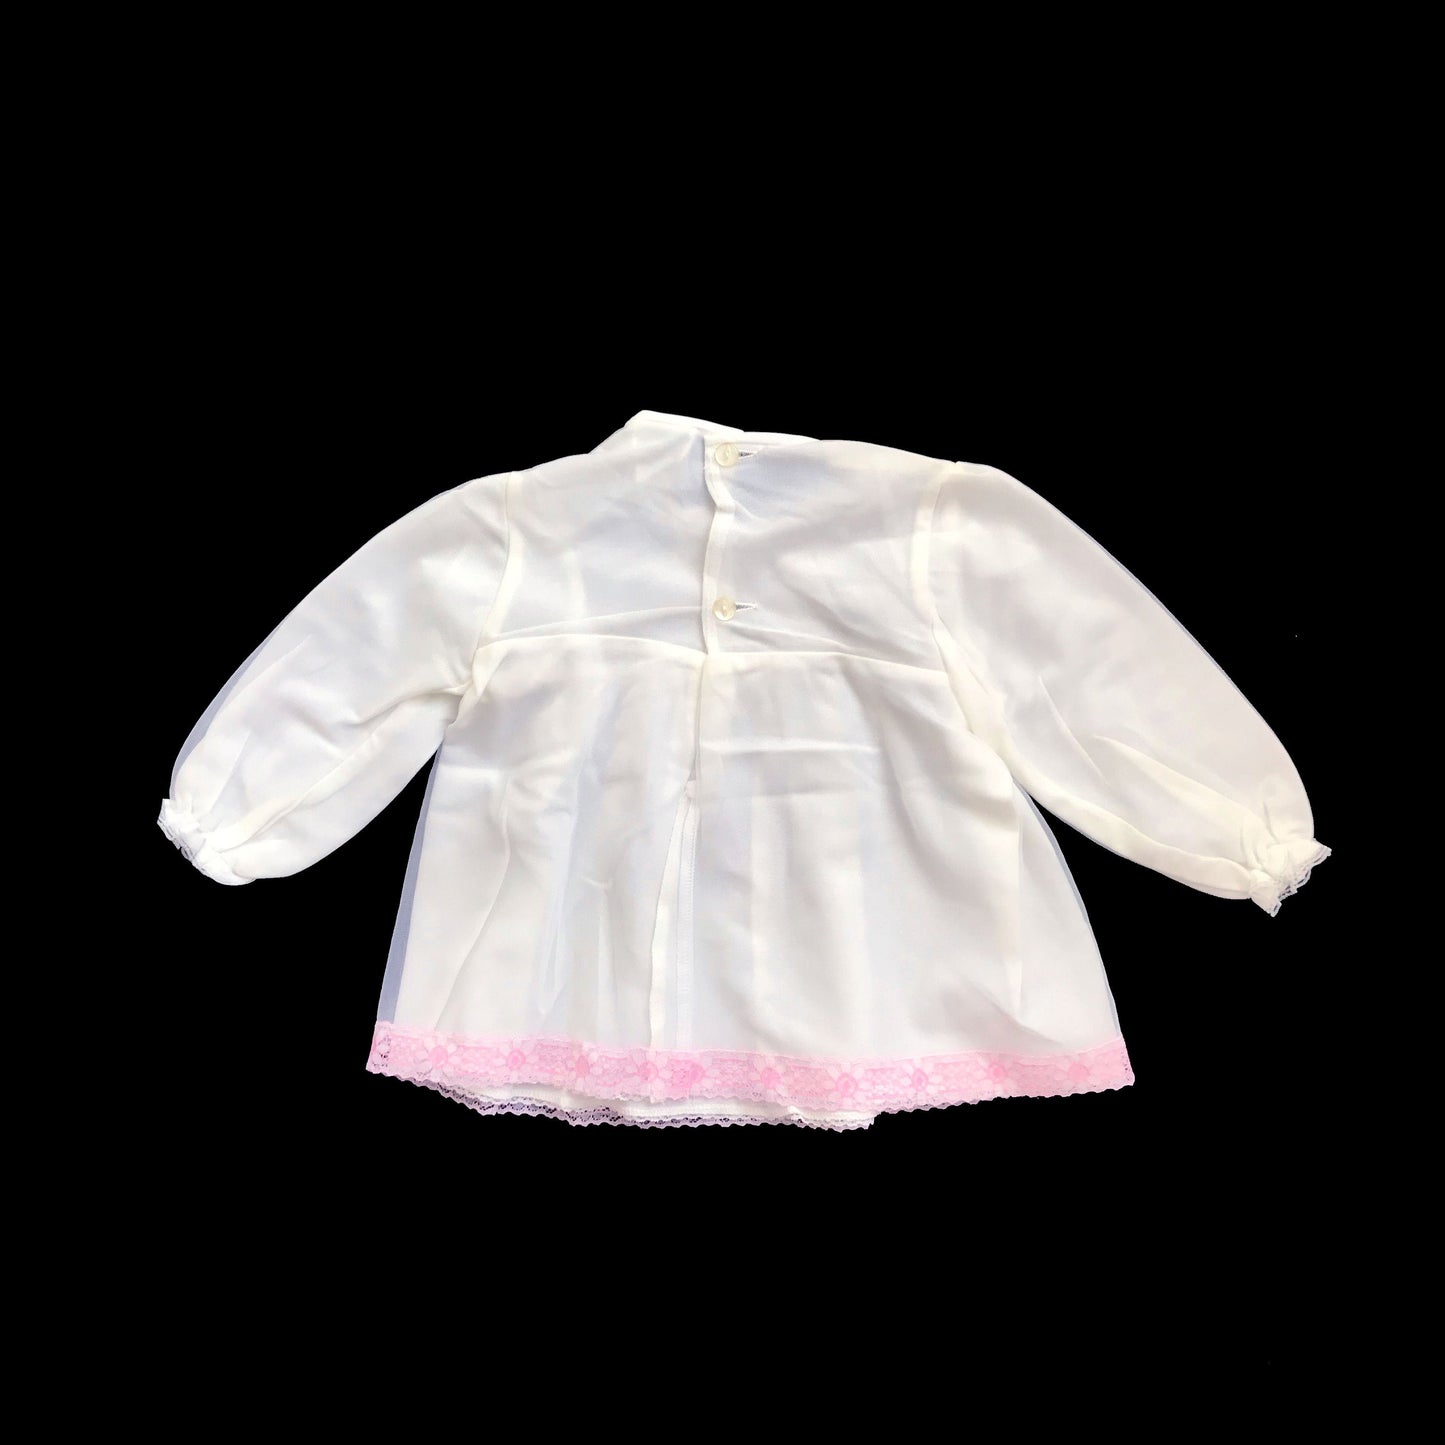 Vintage 60's White/Pink Sheer / Ruffle  Dress Made in Britain NOS 6-9M